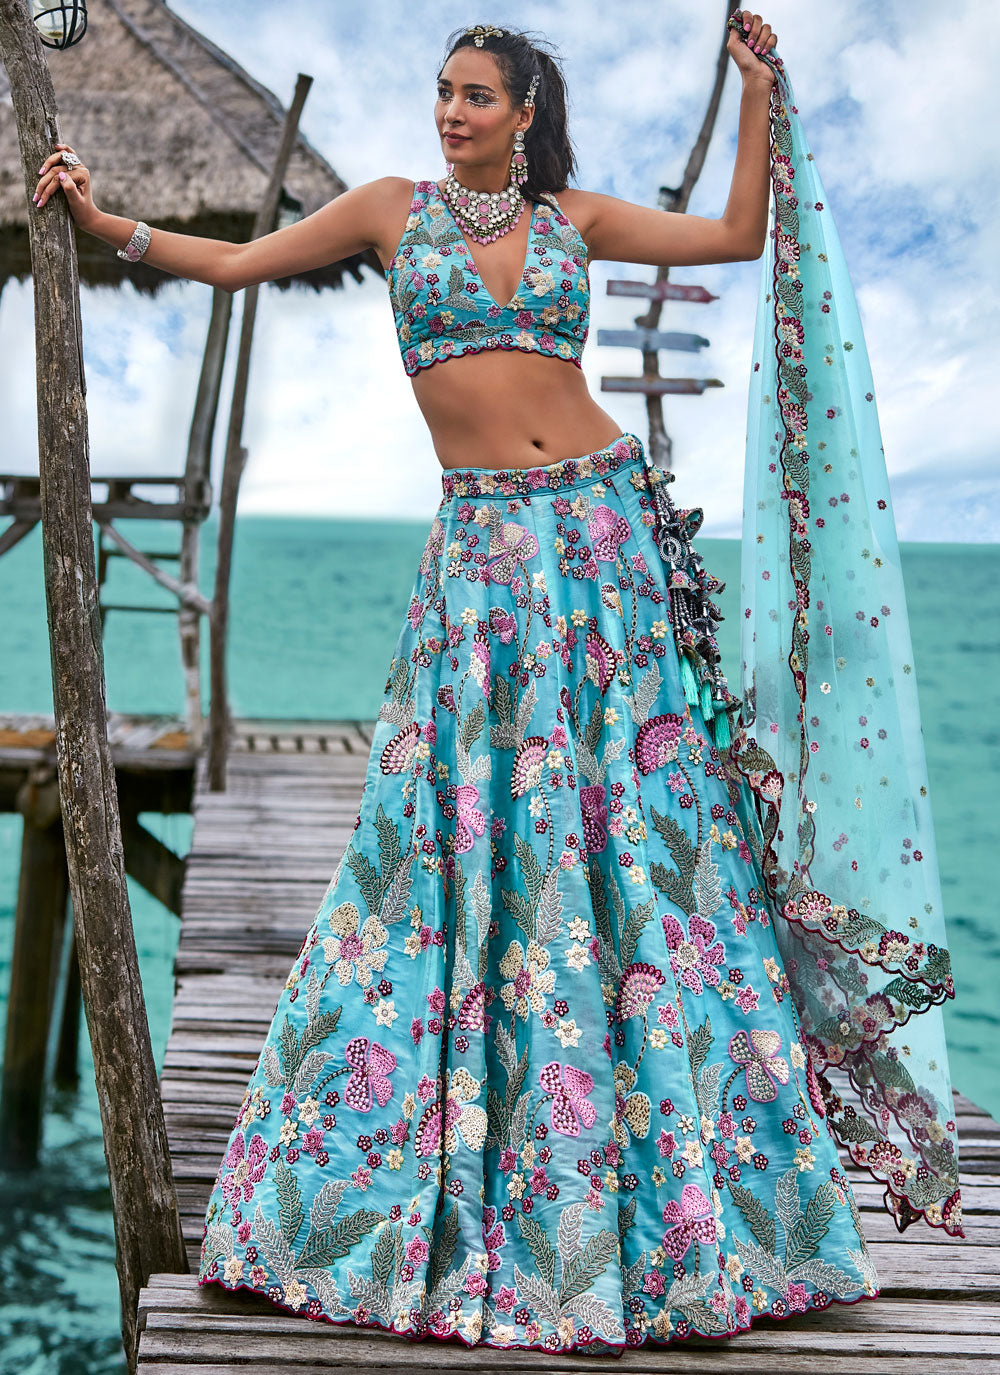 Embroidered, Sequins And Thread Work Organza Lehenga Choli In Turquoise